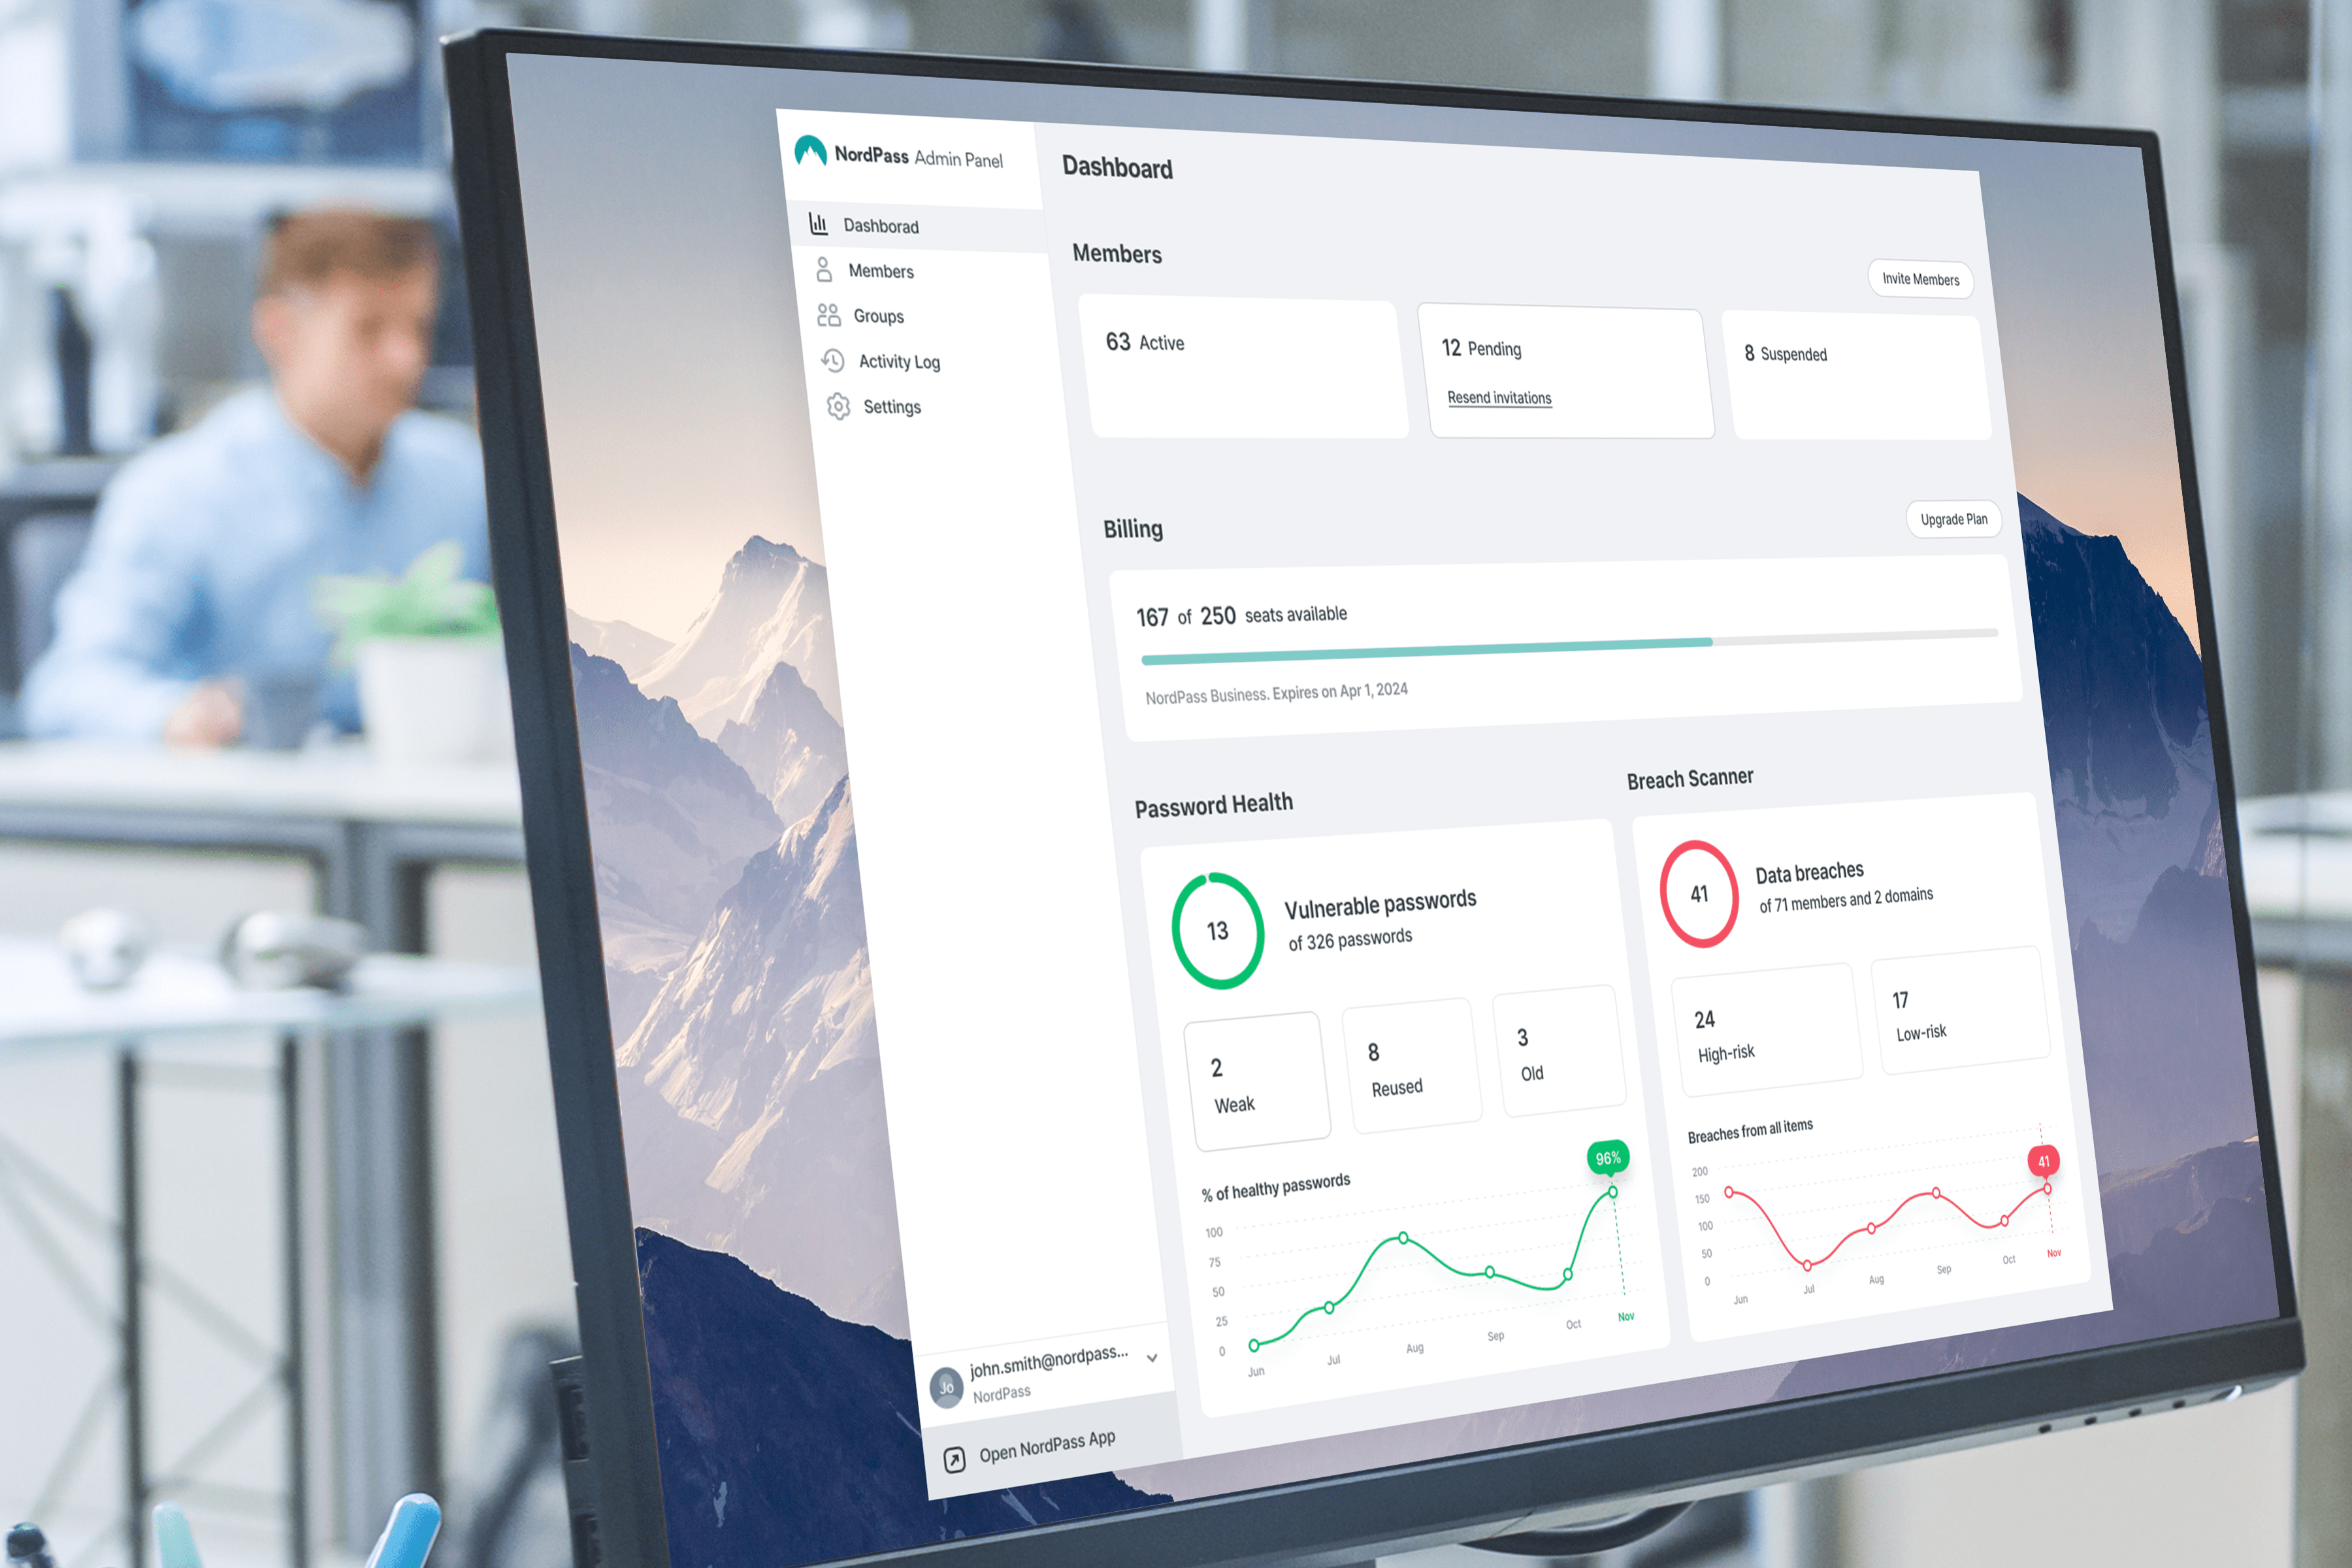 Security dashboard - Get insight into domain breaches and identify weak, old, or reused passwords with the Password Health feature within your company.